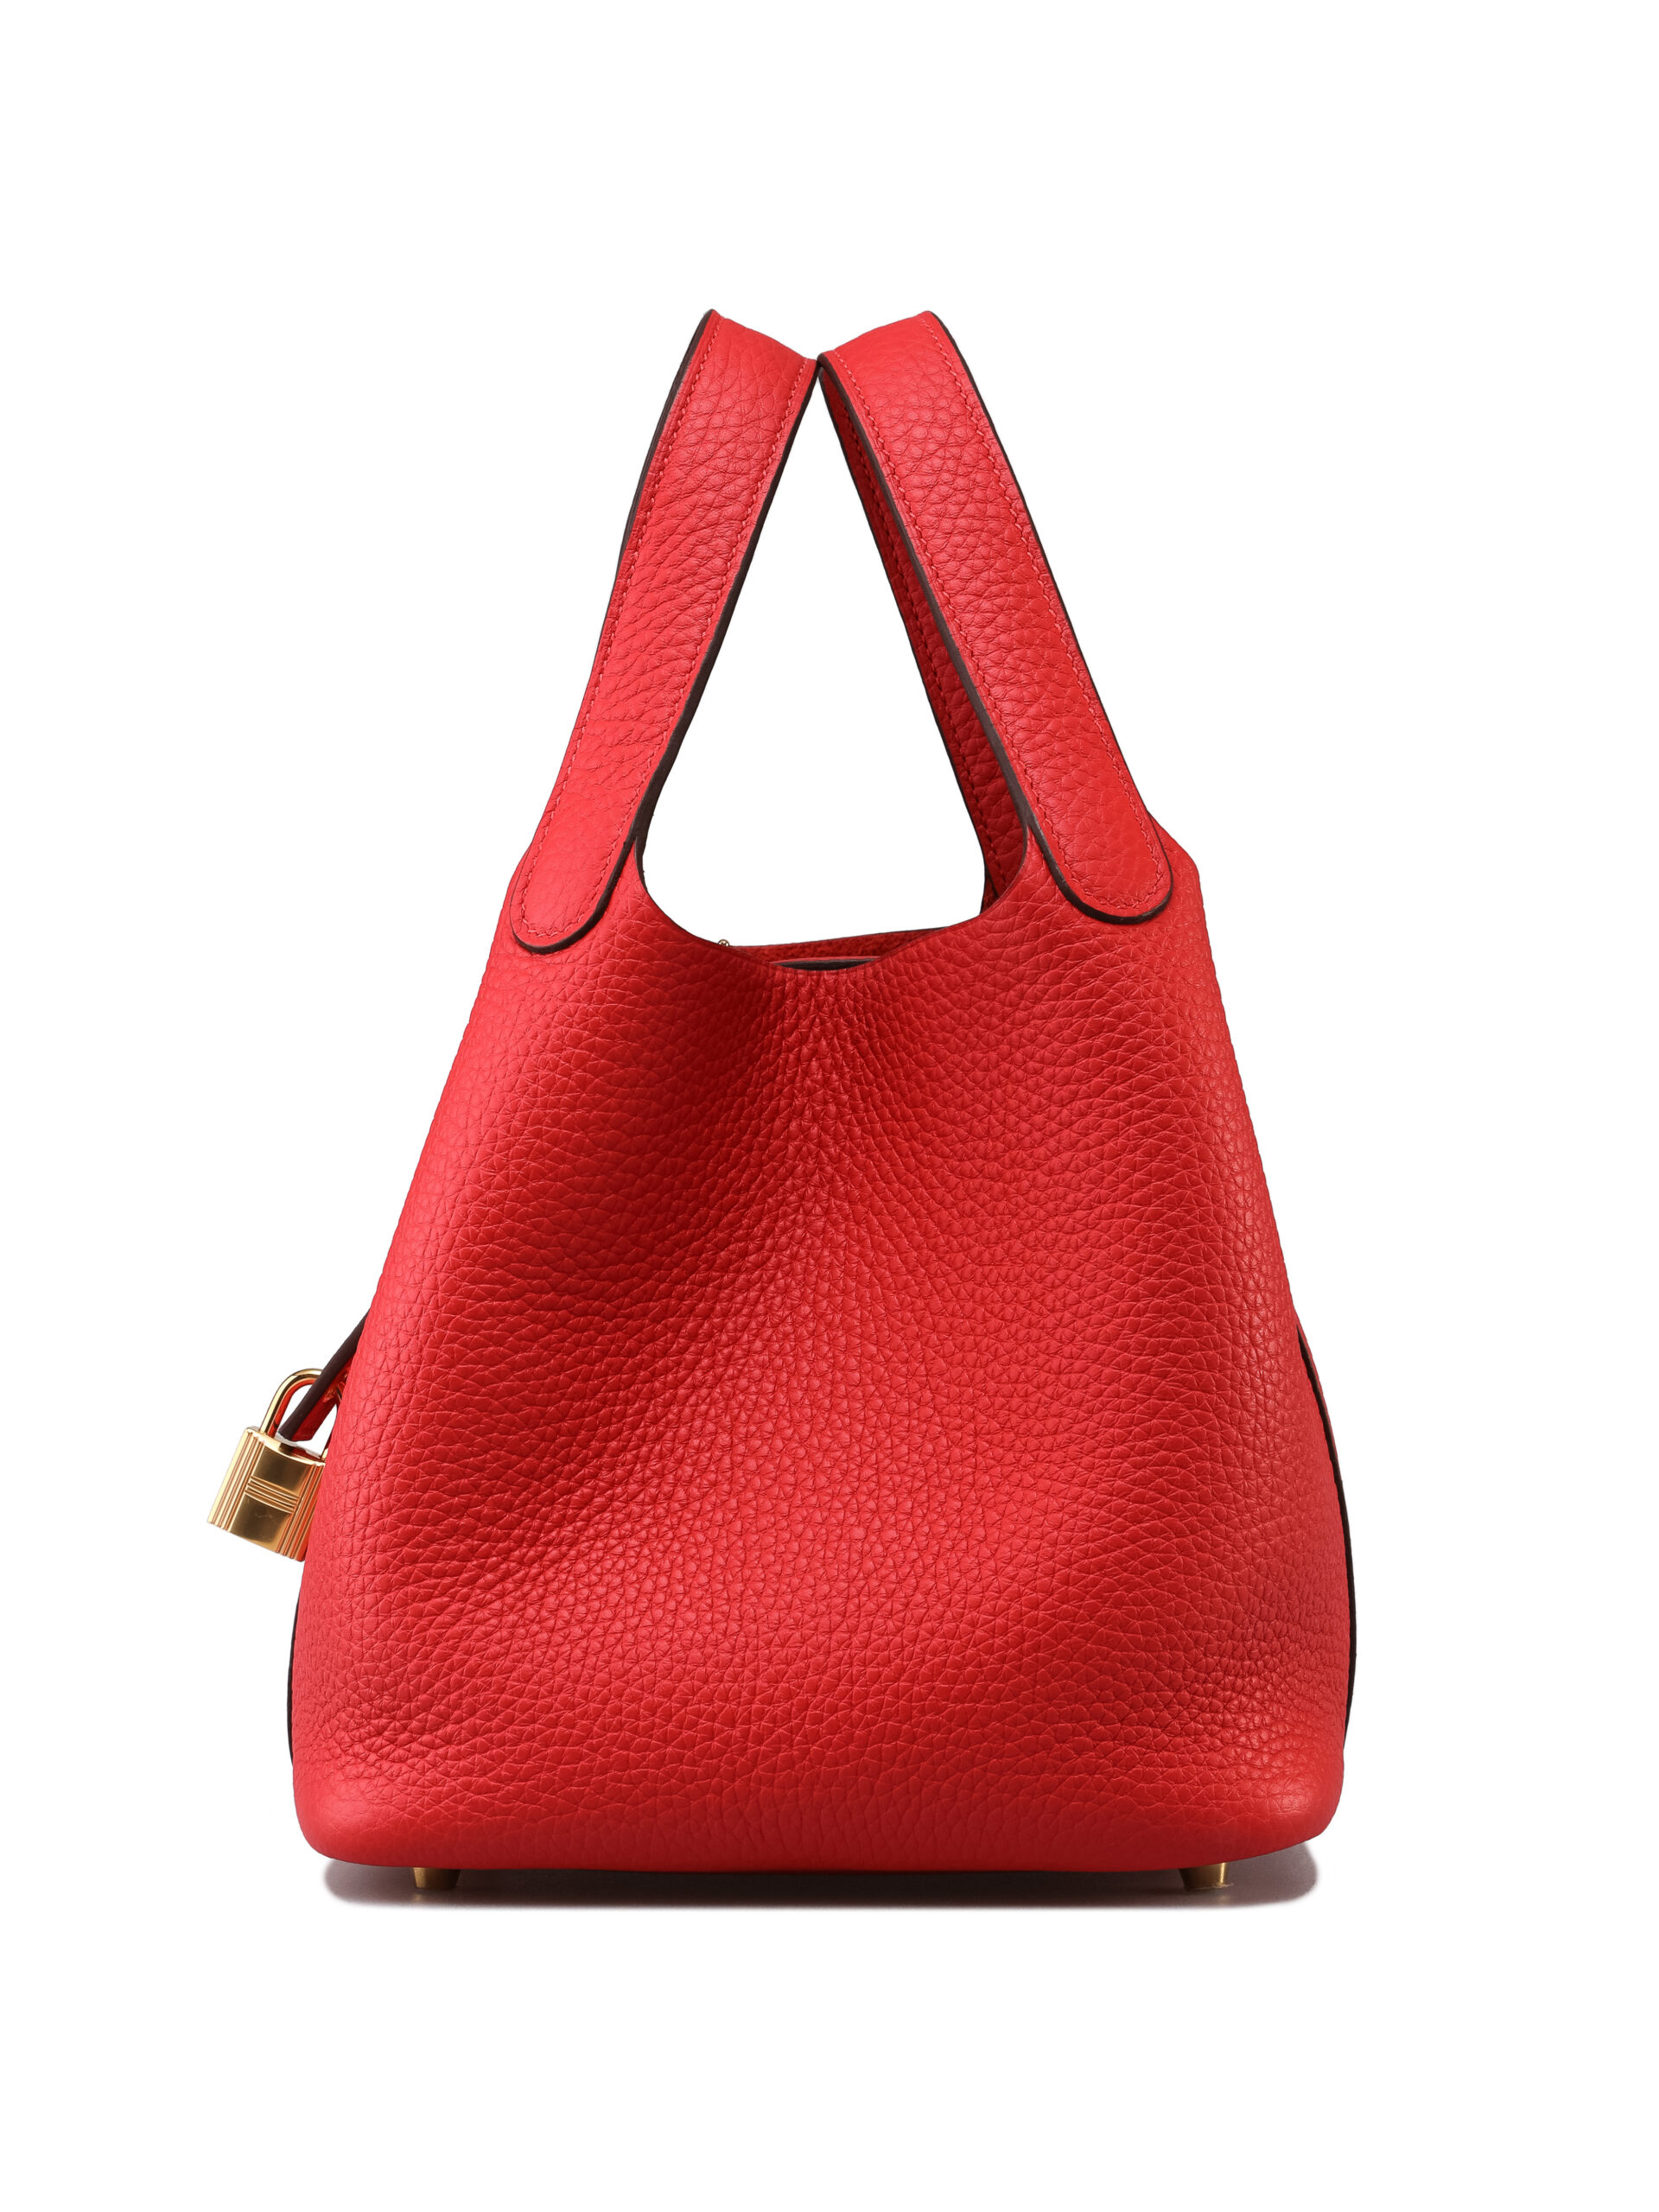 Hermes Rouge Tomate Clemence Leather Picotin Lock 18cm